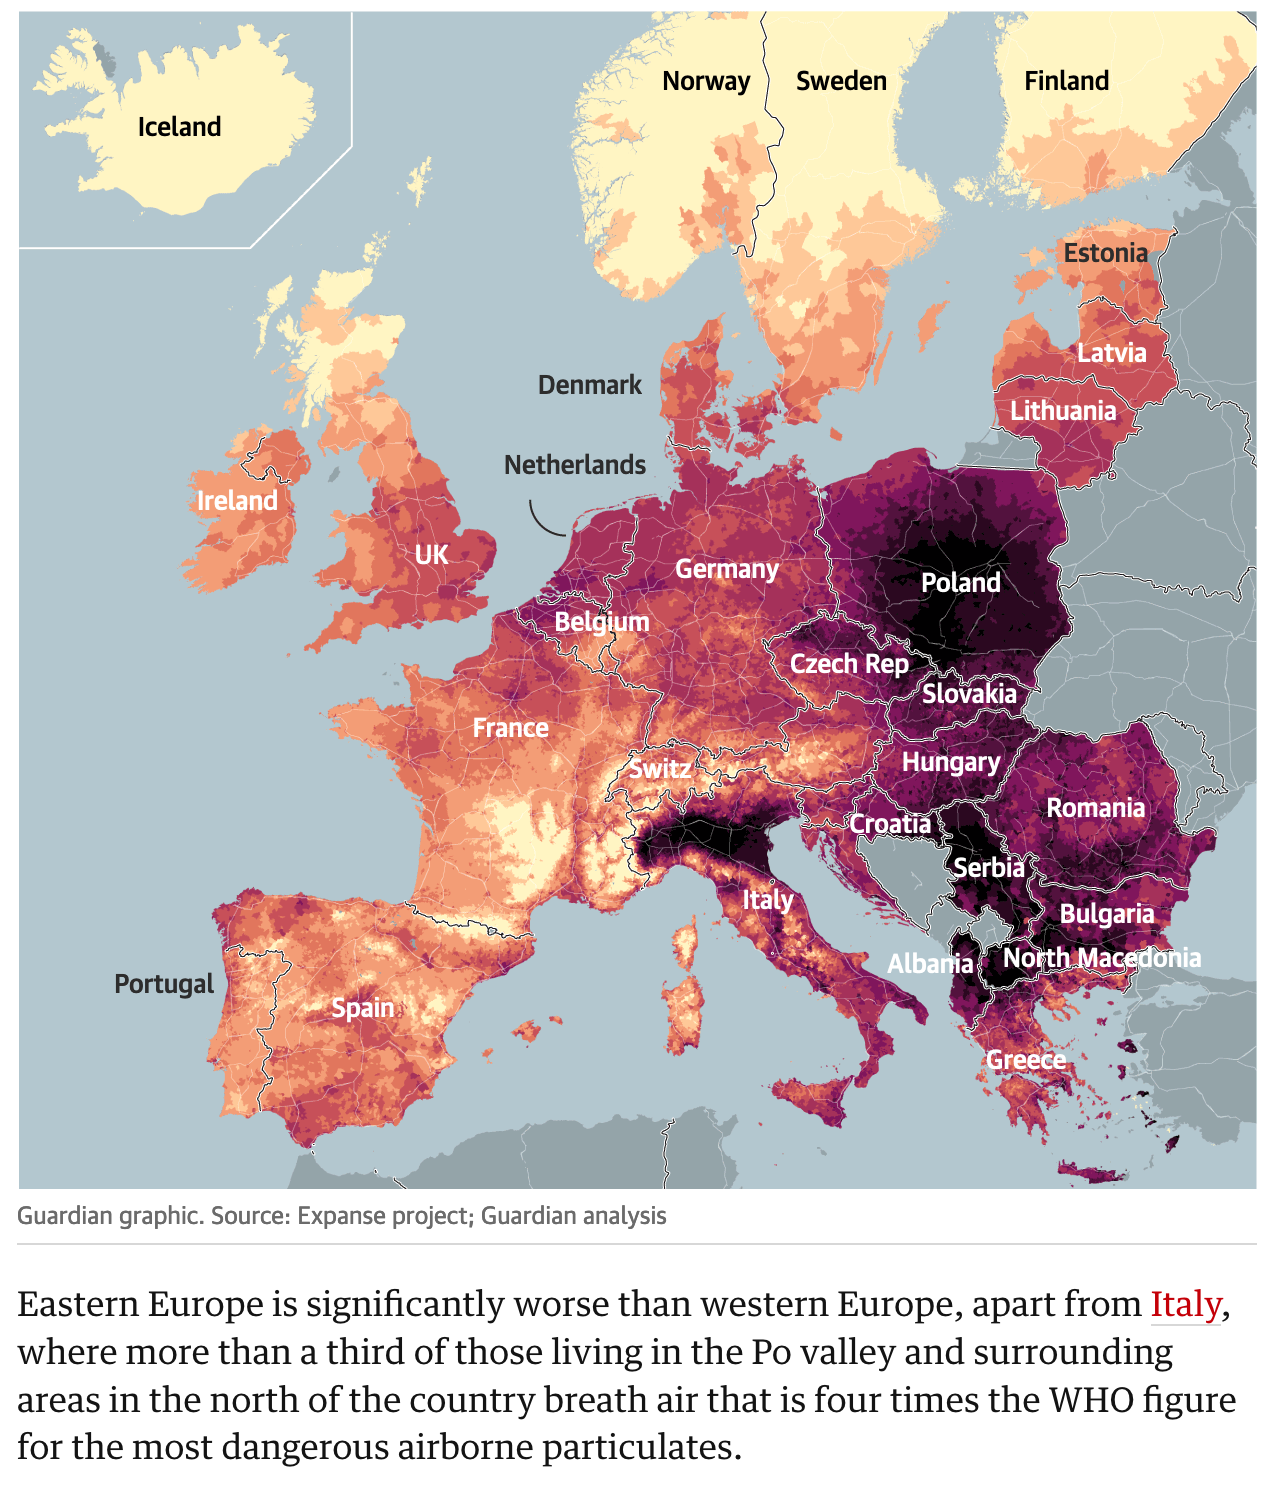  Matthew Taylor and Pamela Duncan, “Revealed: almost everyone in Europe is breathing toxic air”,  The Guardian , September 29 2023 